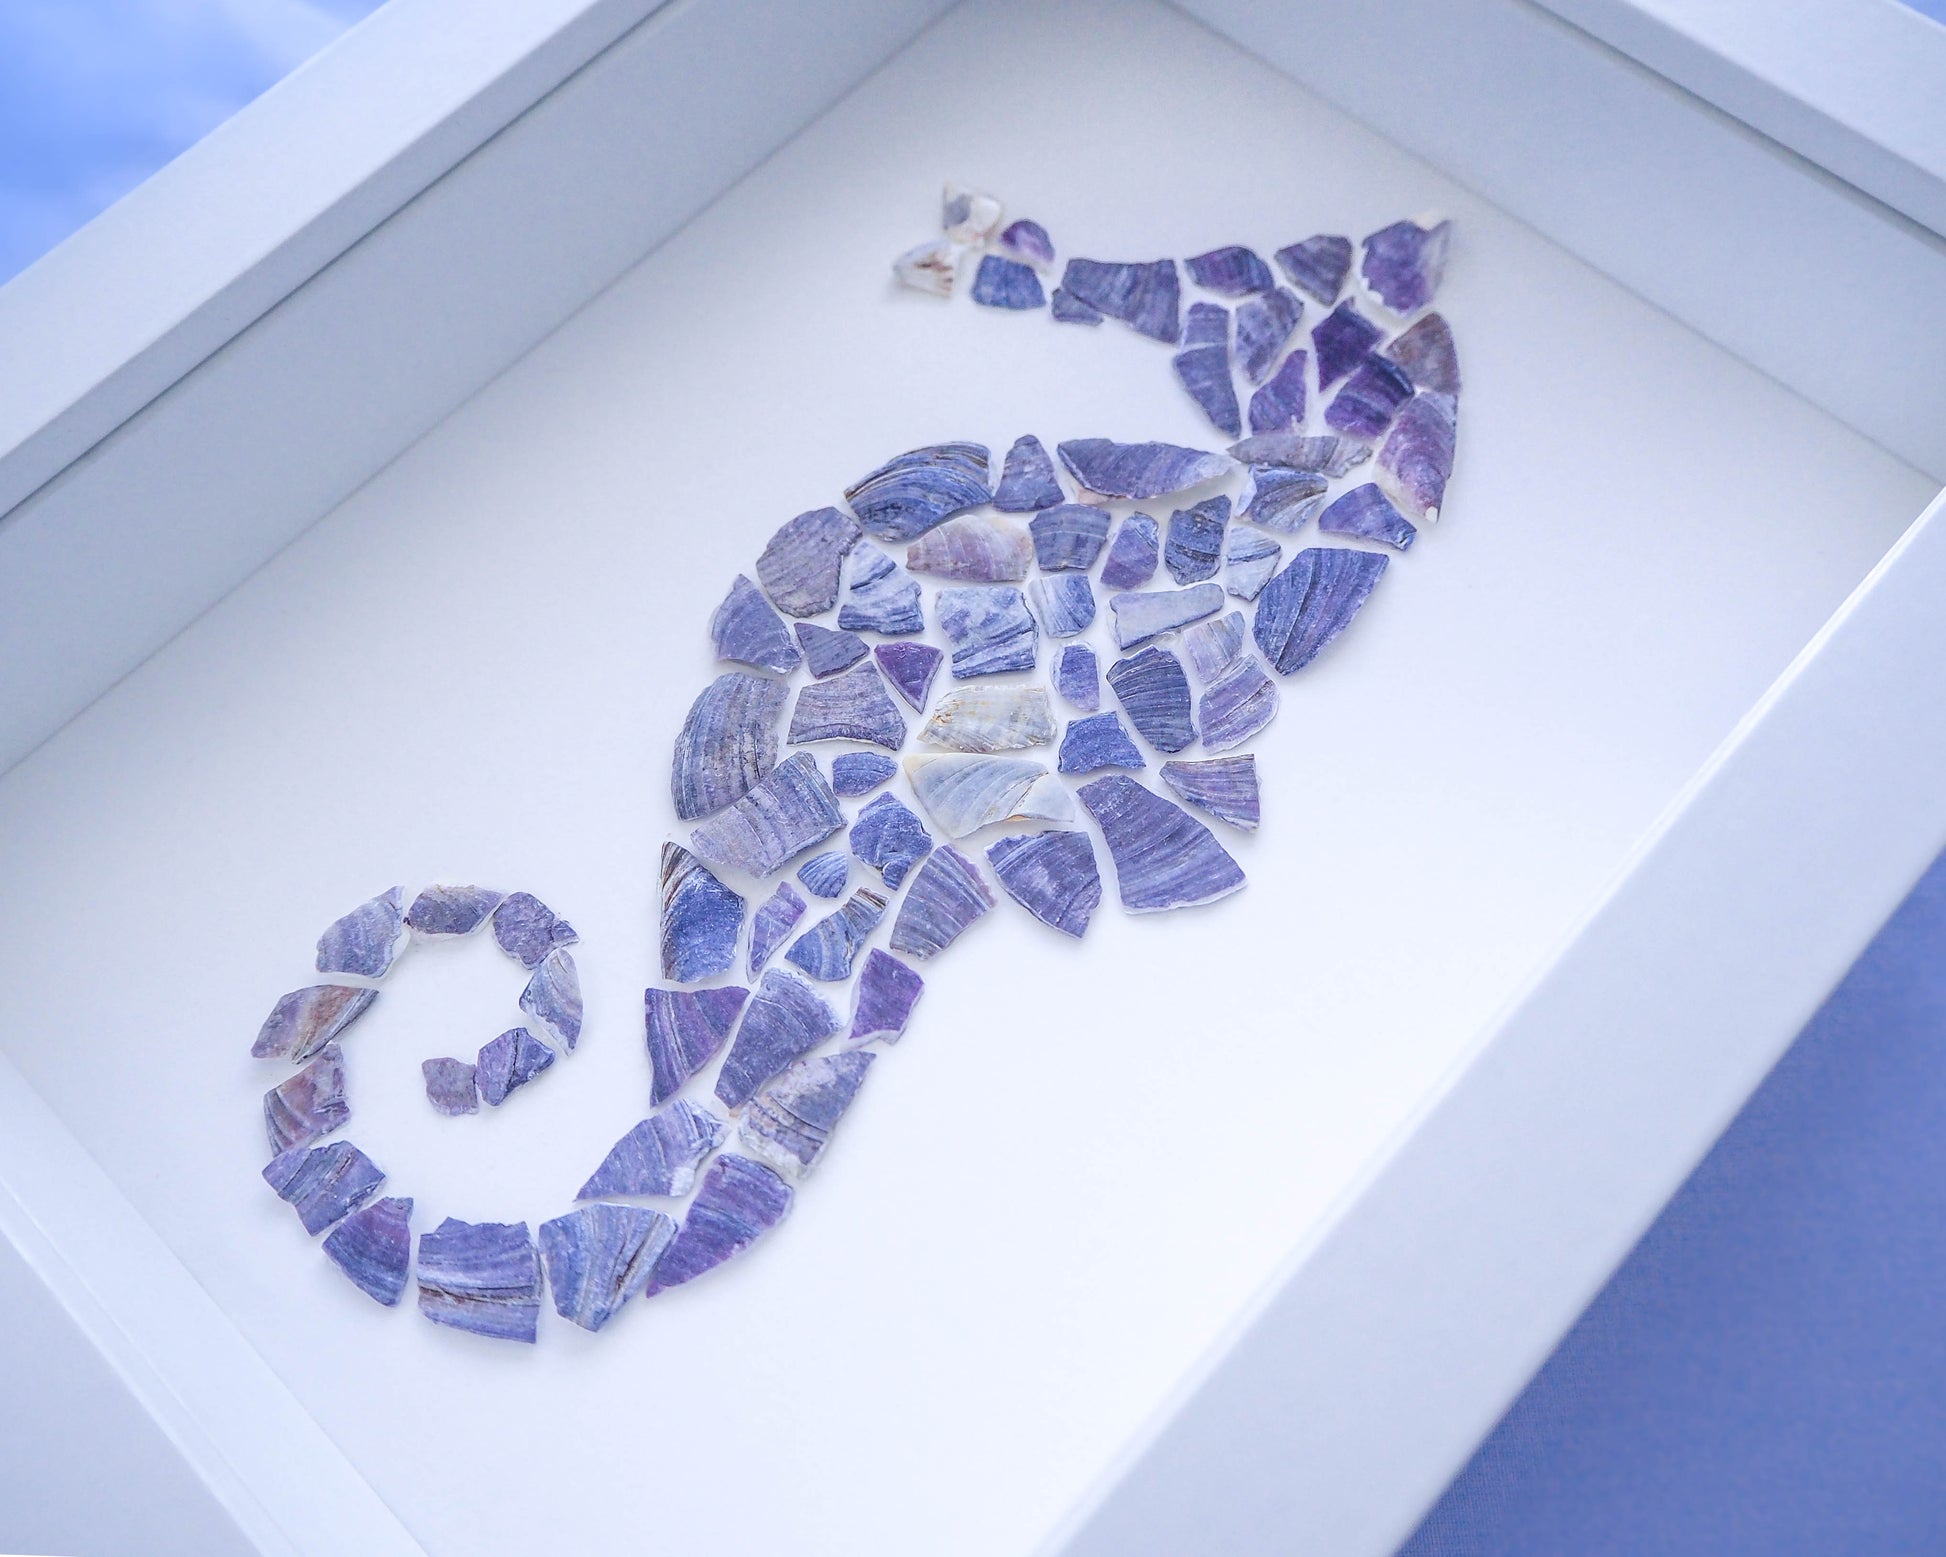 Close-up of the frame surrounding the seahorse mosaic, adding a rustic yet elegant touch that enhances the coastal charm of the artwork